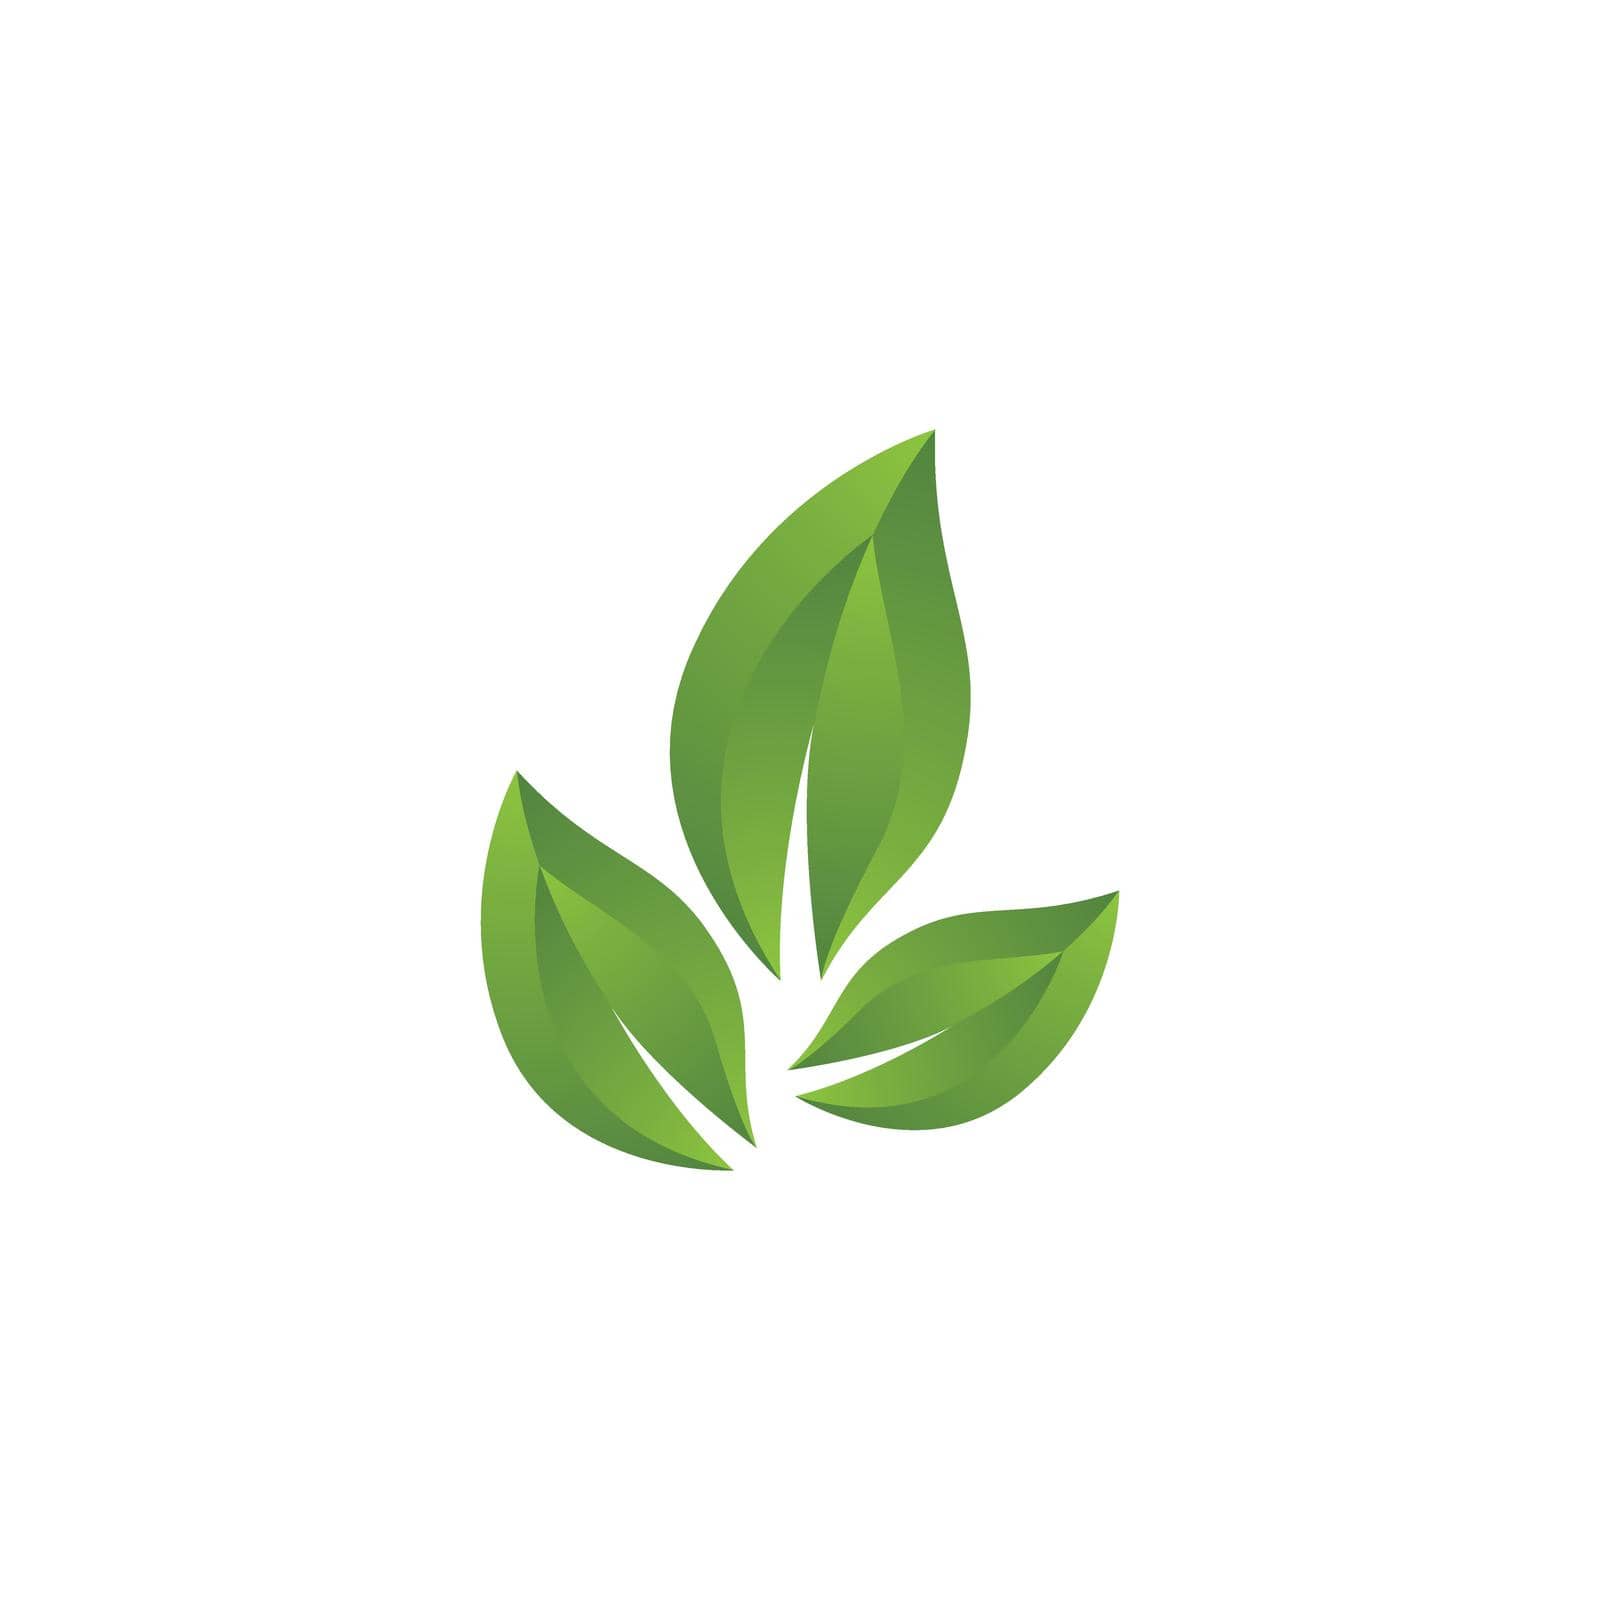 Ecology vector icon illustration design by Fat17